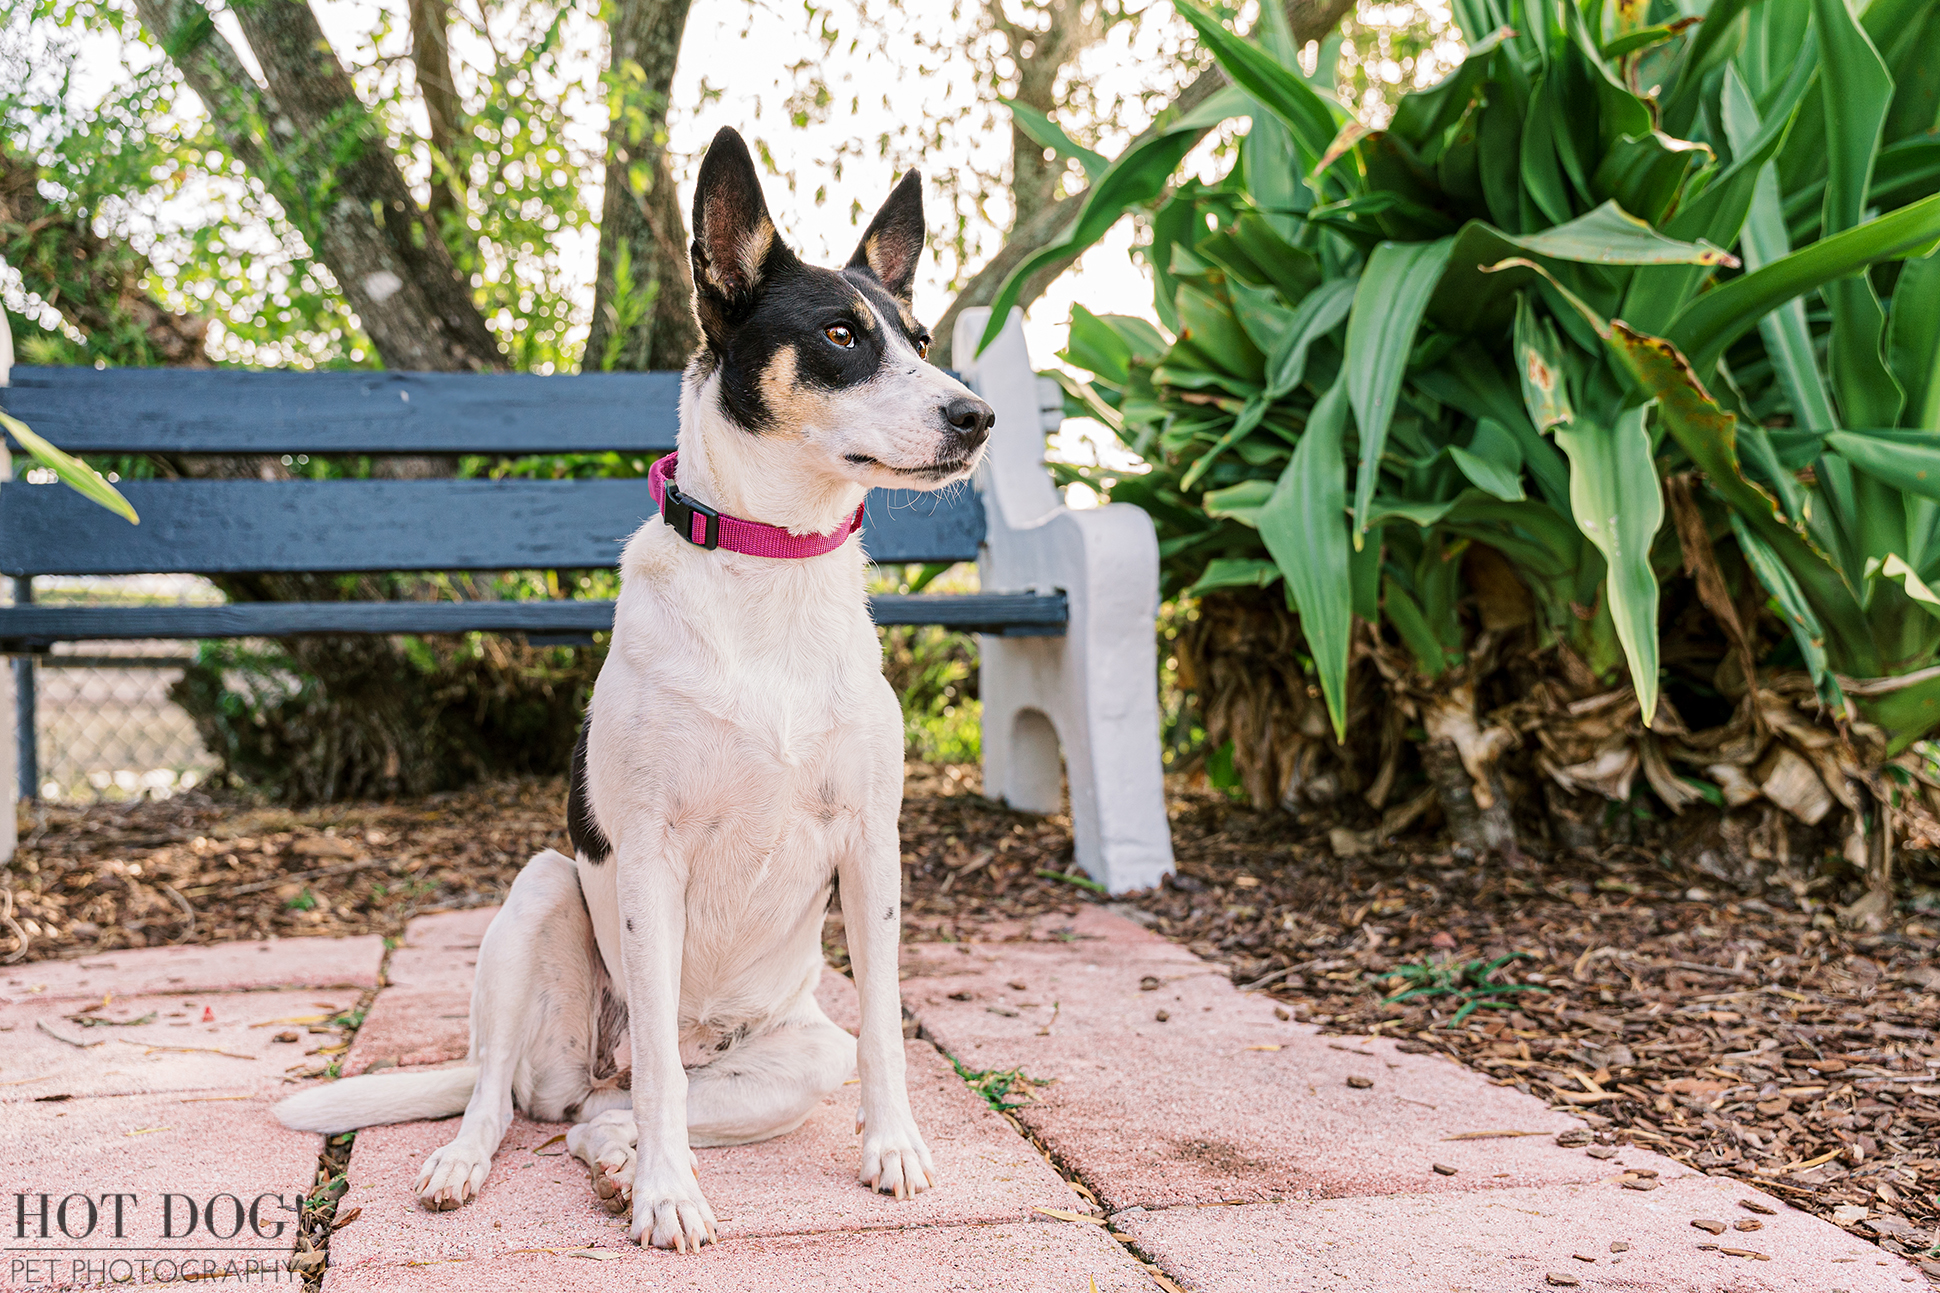 Rat Terrier Mix Rescue Makeover: Orlando pet photographer Hot Dog! Pet Photography documents the remarkable transformation of Miracle, the once-sheltered rat terrier mix, into a radiant family pup.